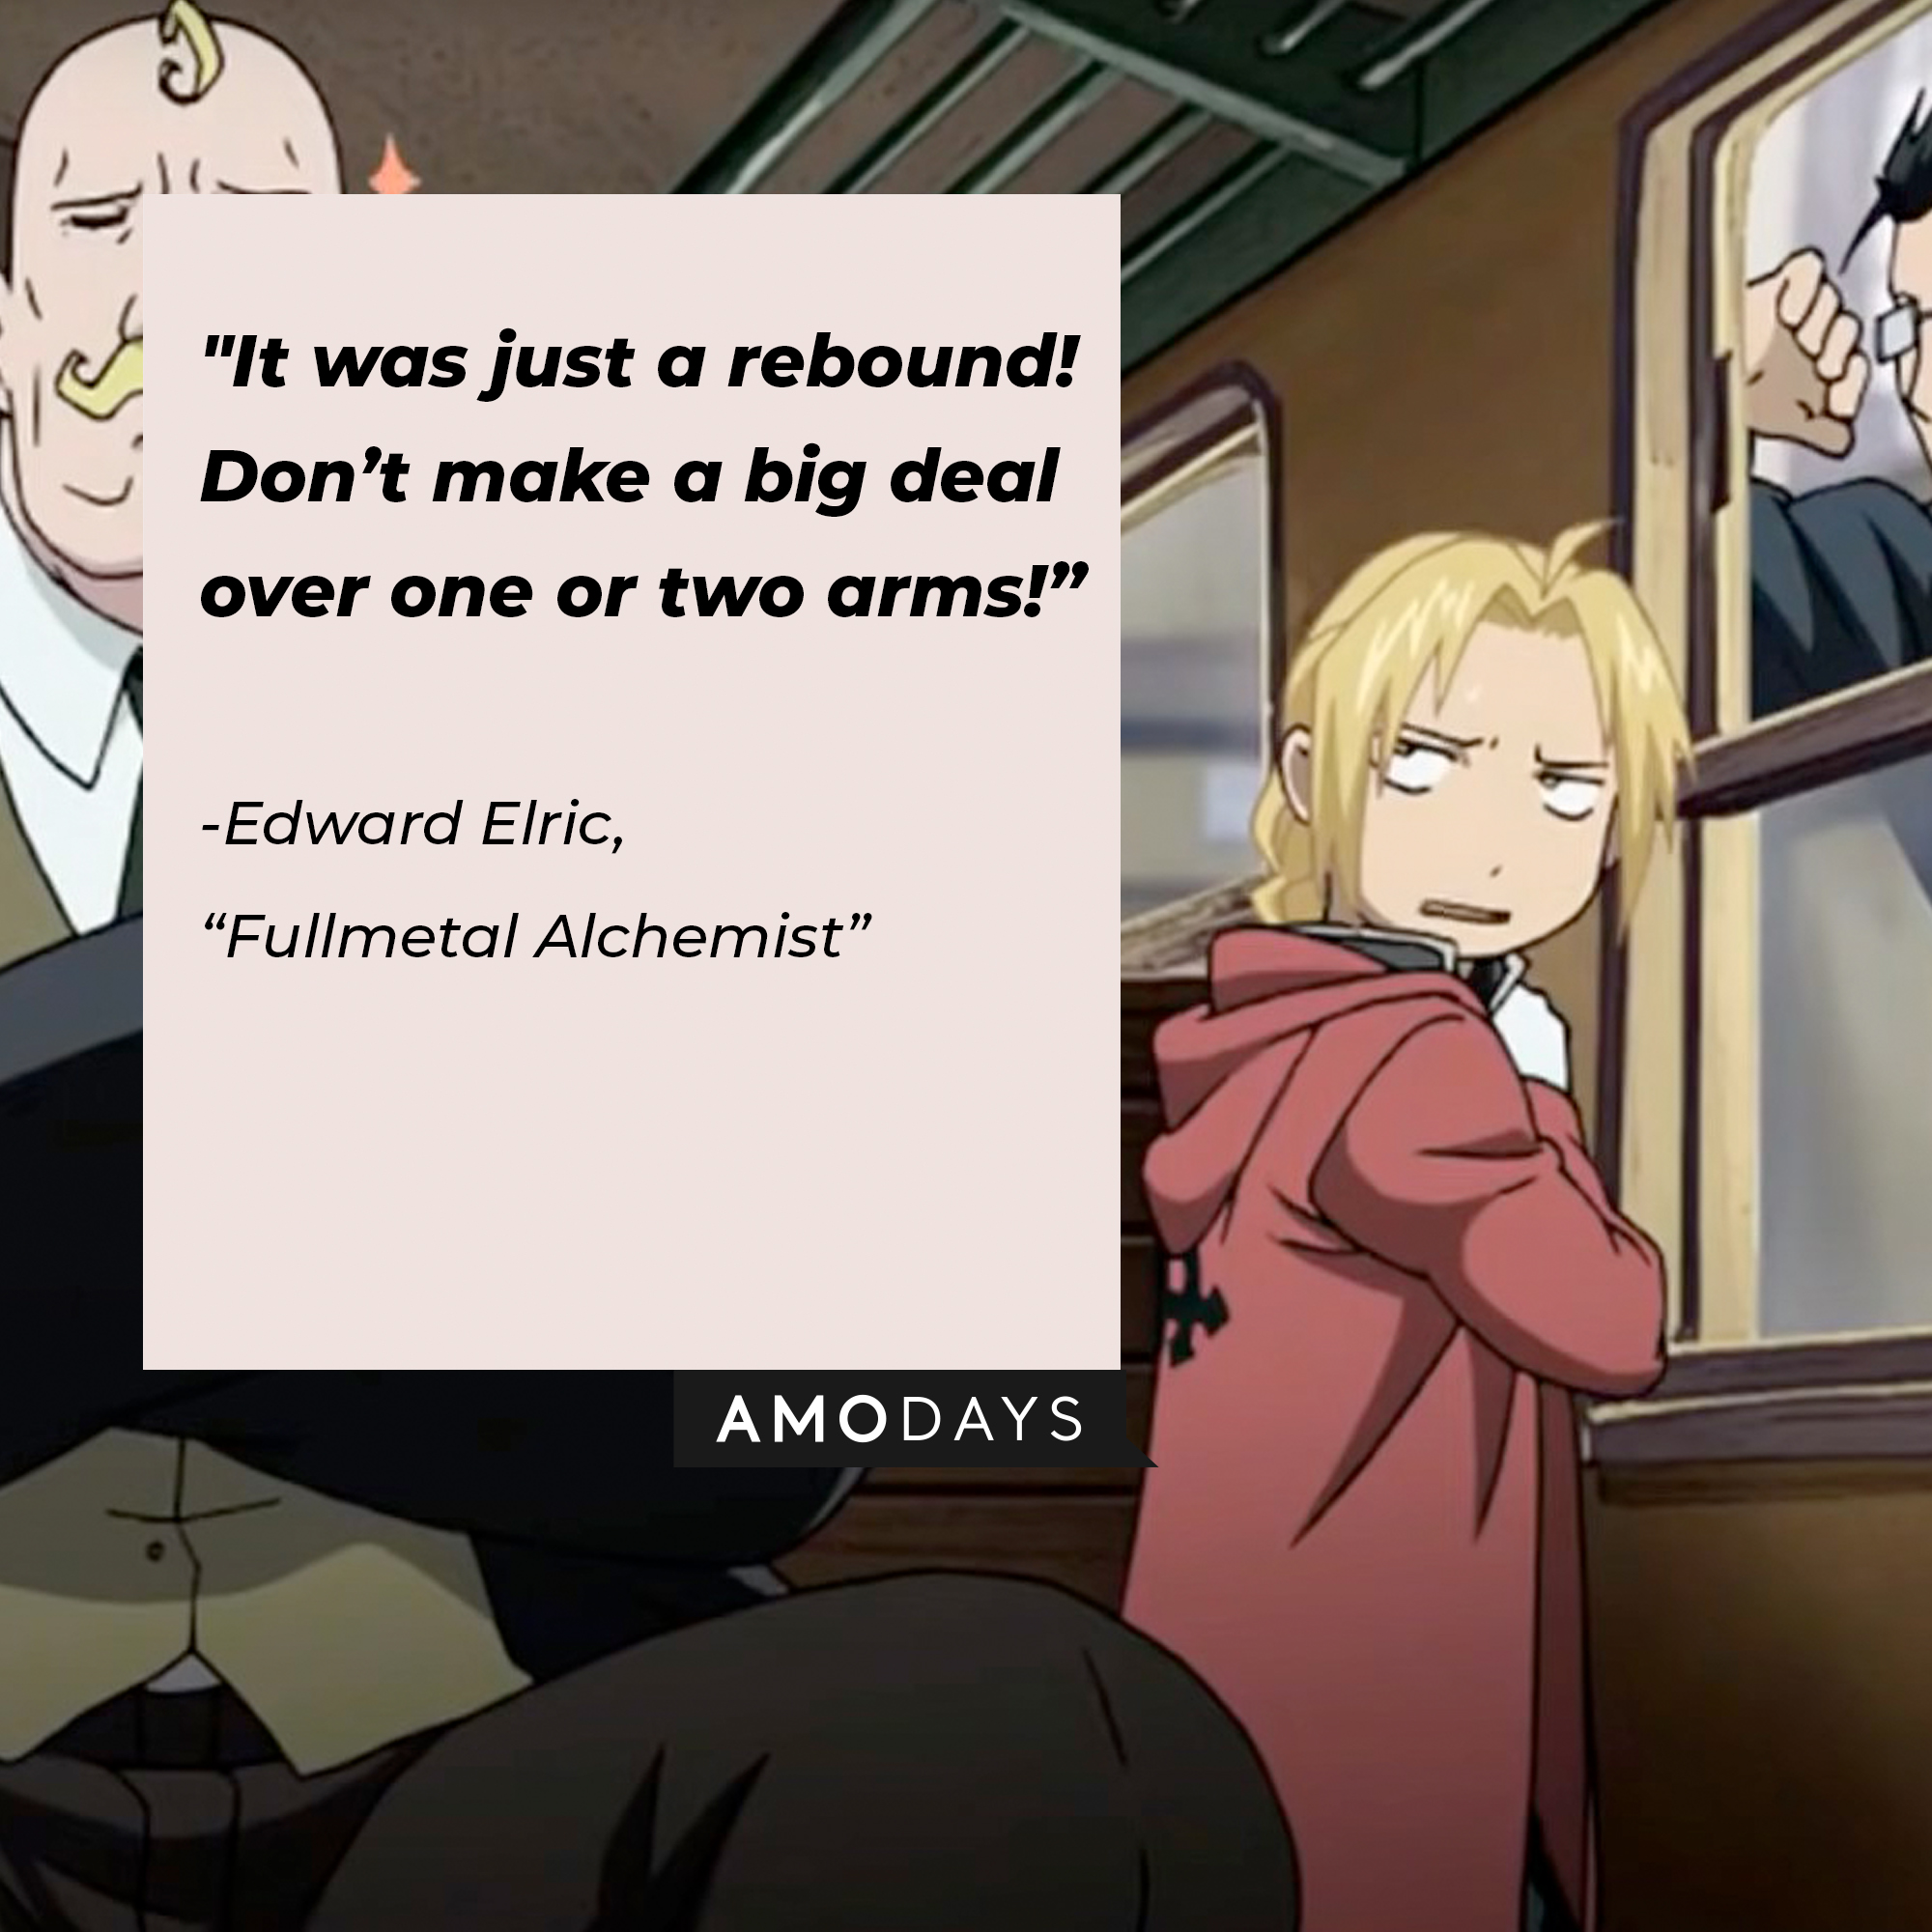 Edward Elric's quote: "It was just a rebound! Don’t make a big deal over one or two arms!” | Image: facebook.com/FMAHiromuArakawa